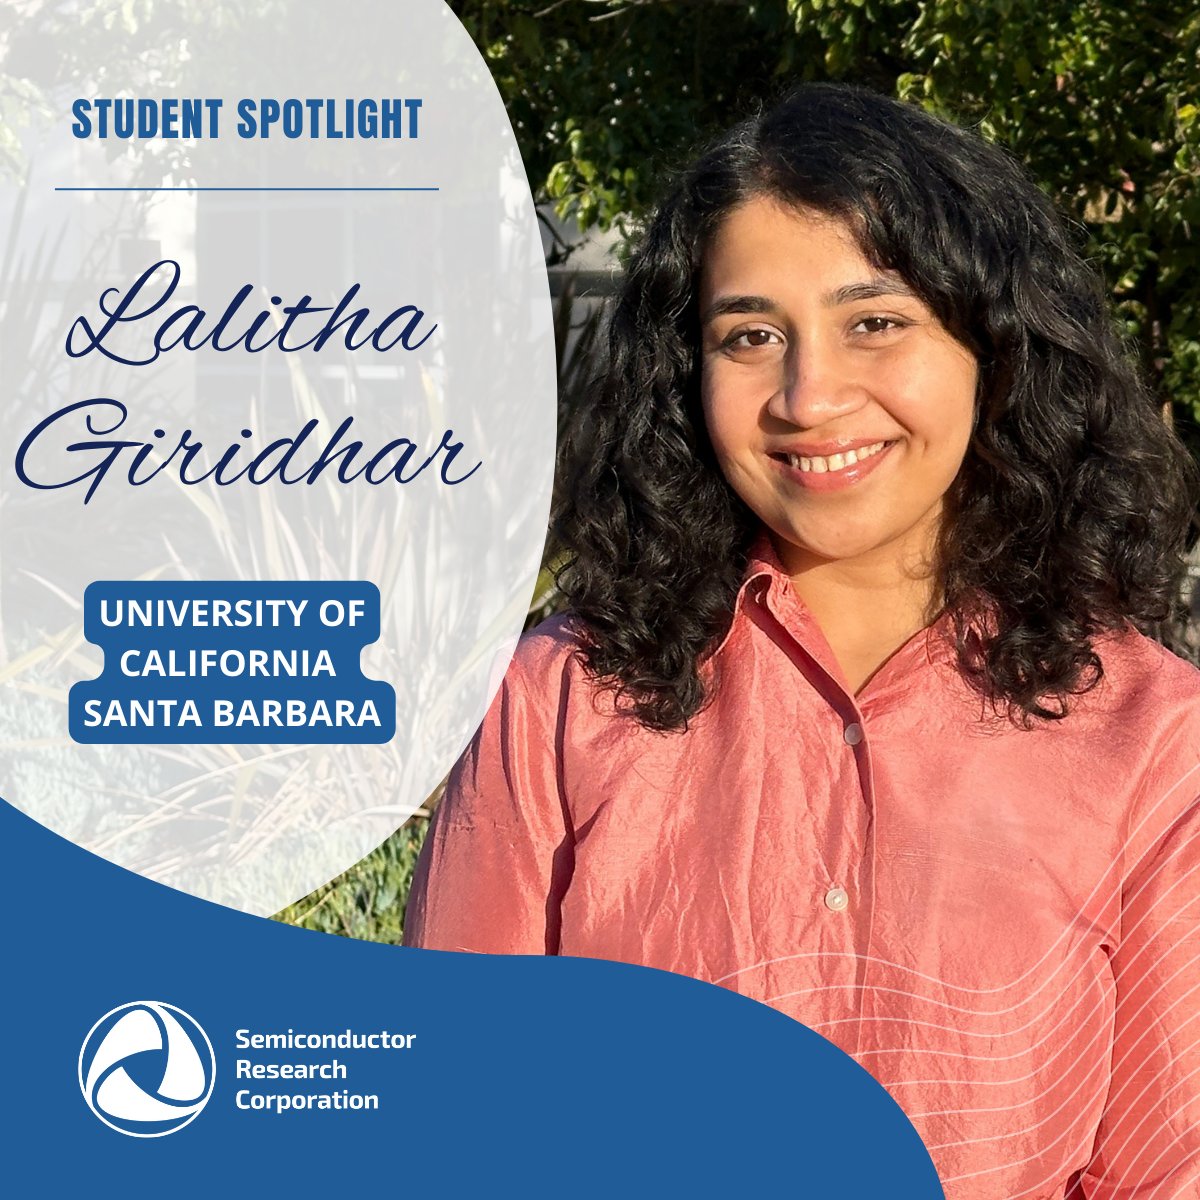 SRC is proud to support the research of innovators like Lalitha Giridhar, a 4th-year PhD student at @UCSBengineering! Read more: linkedin.com/feed/update/ur…